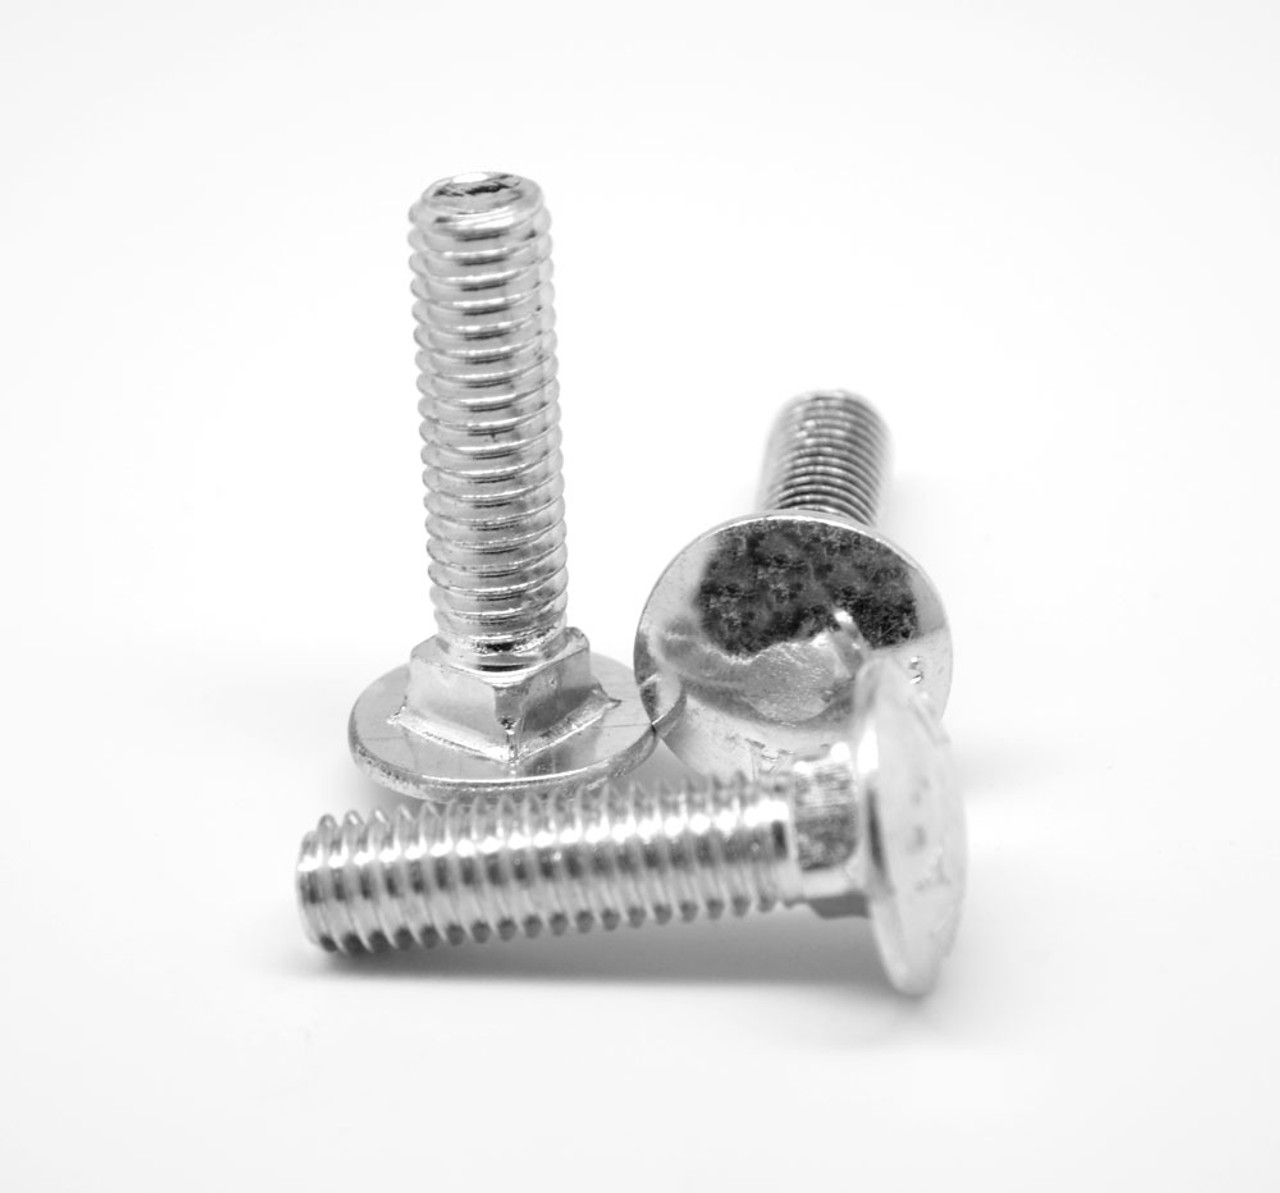 M10 x 1.50 x 50 MM (FT) Coarse Thread DIN 603 Class 4.6 Carriage Bolt Low Carbon Steel Zinc Plated